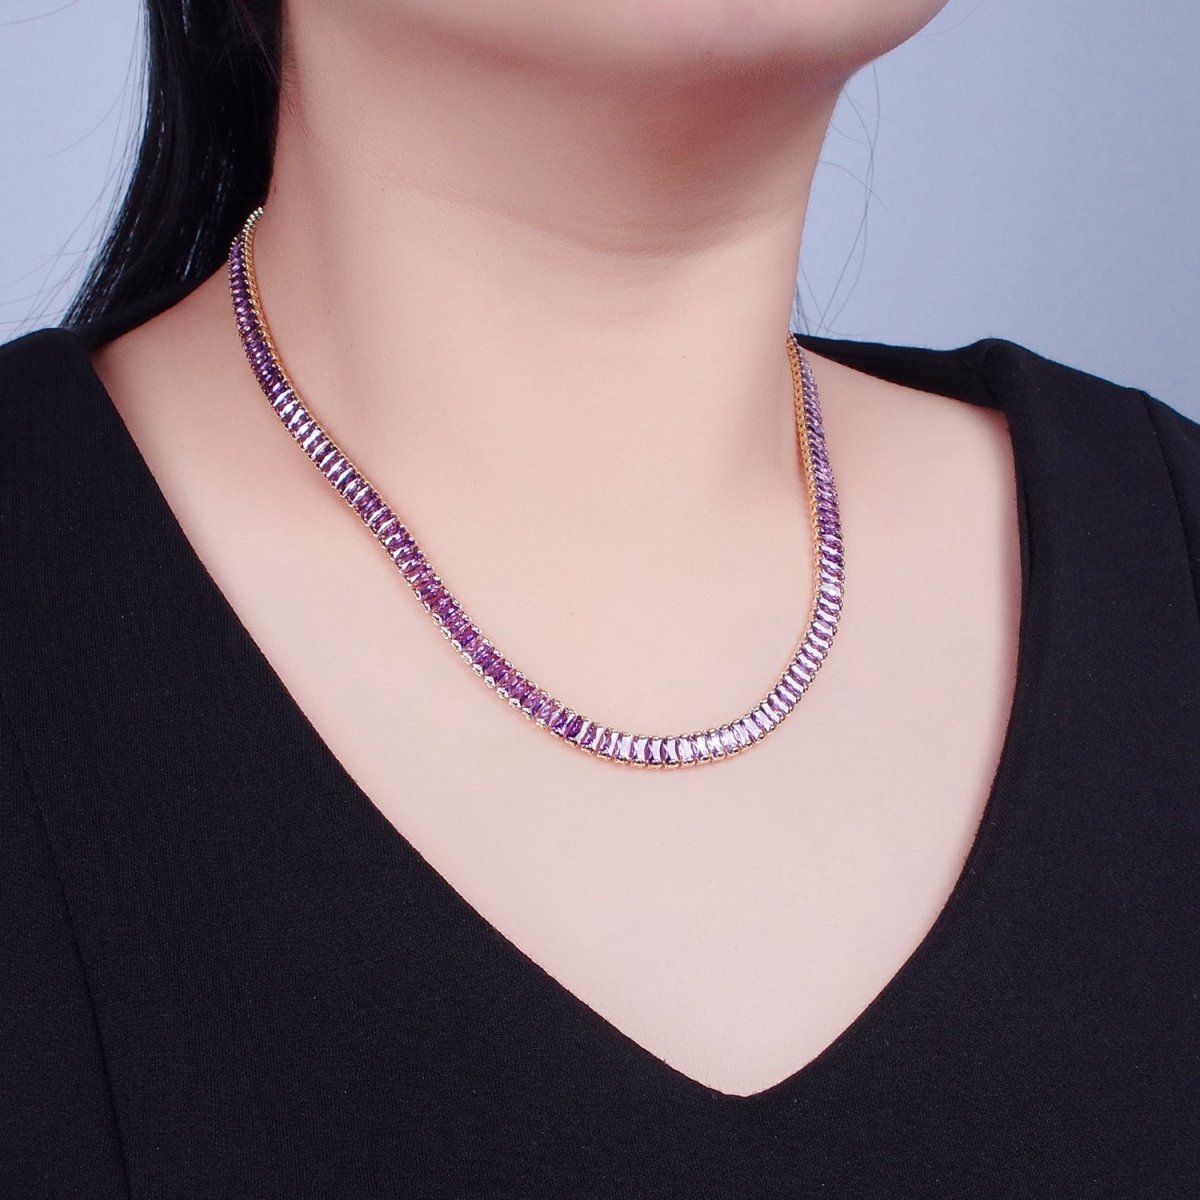 24K Gold Filled Baguette Tennis Chain Necklace, Purple Amethyst Cubic Zirconia Choker Necklace For Jewelry Making | WA-671 Clearance Pricing - DLUXCA